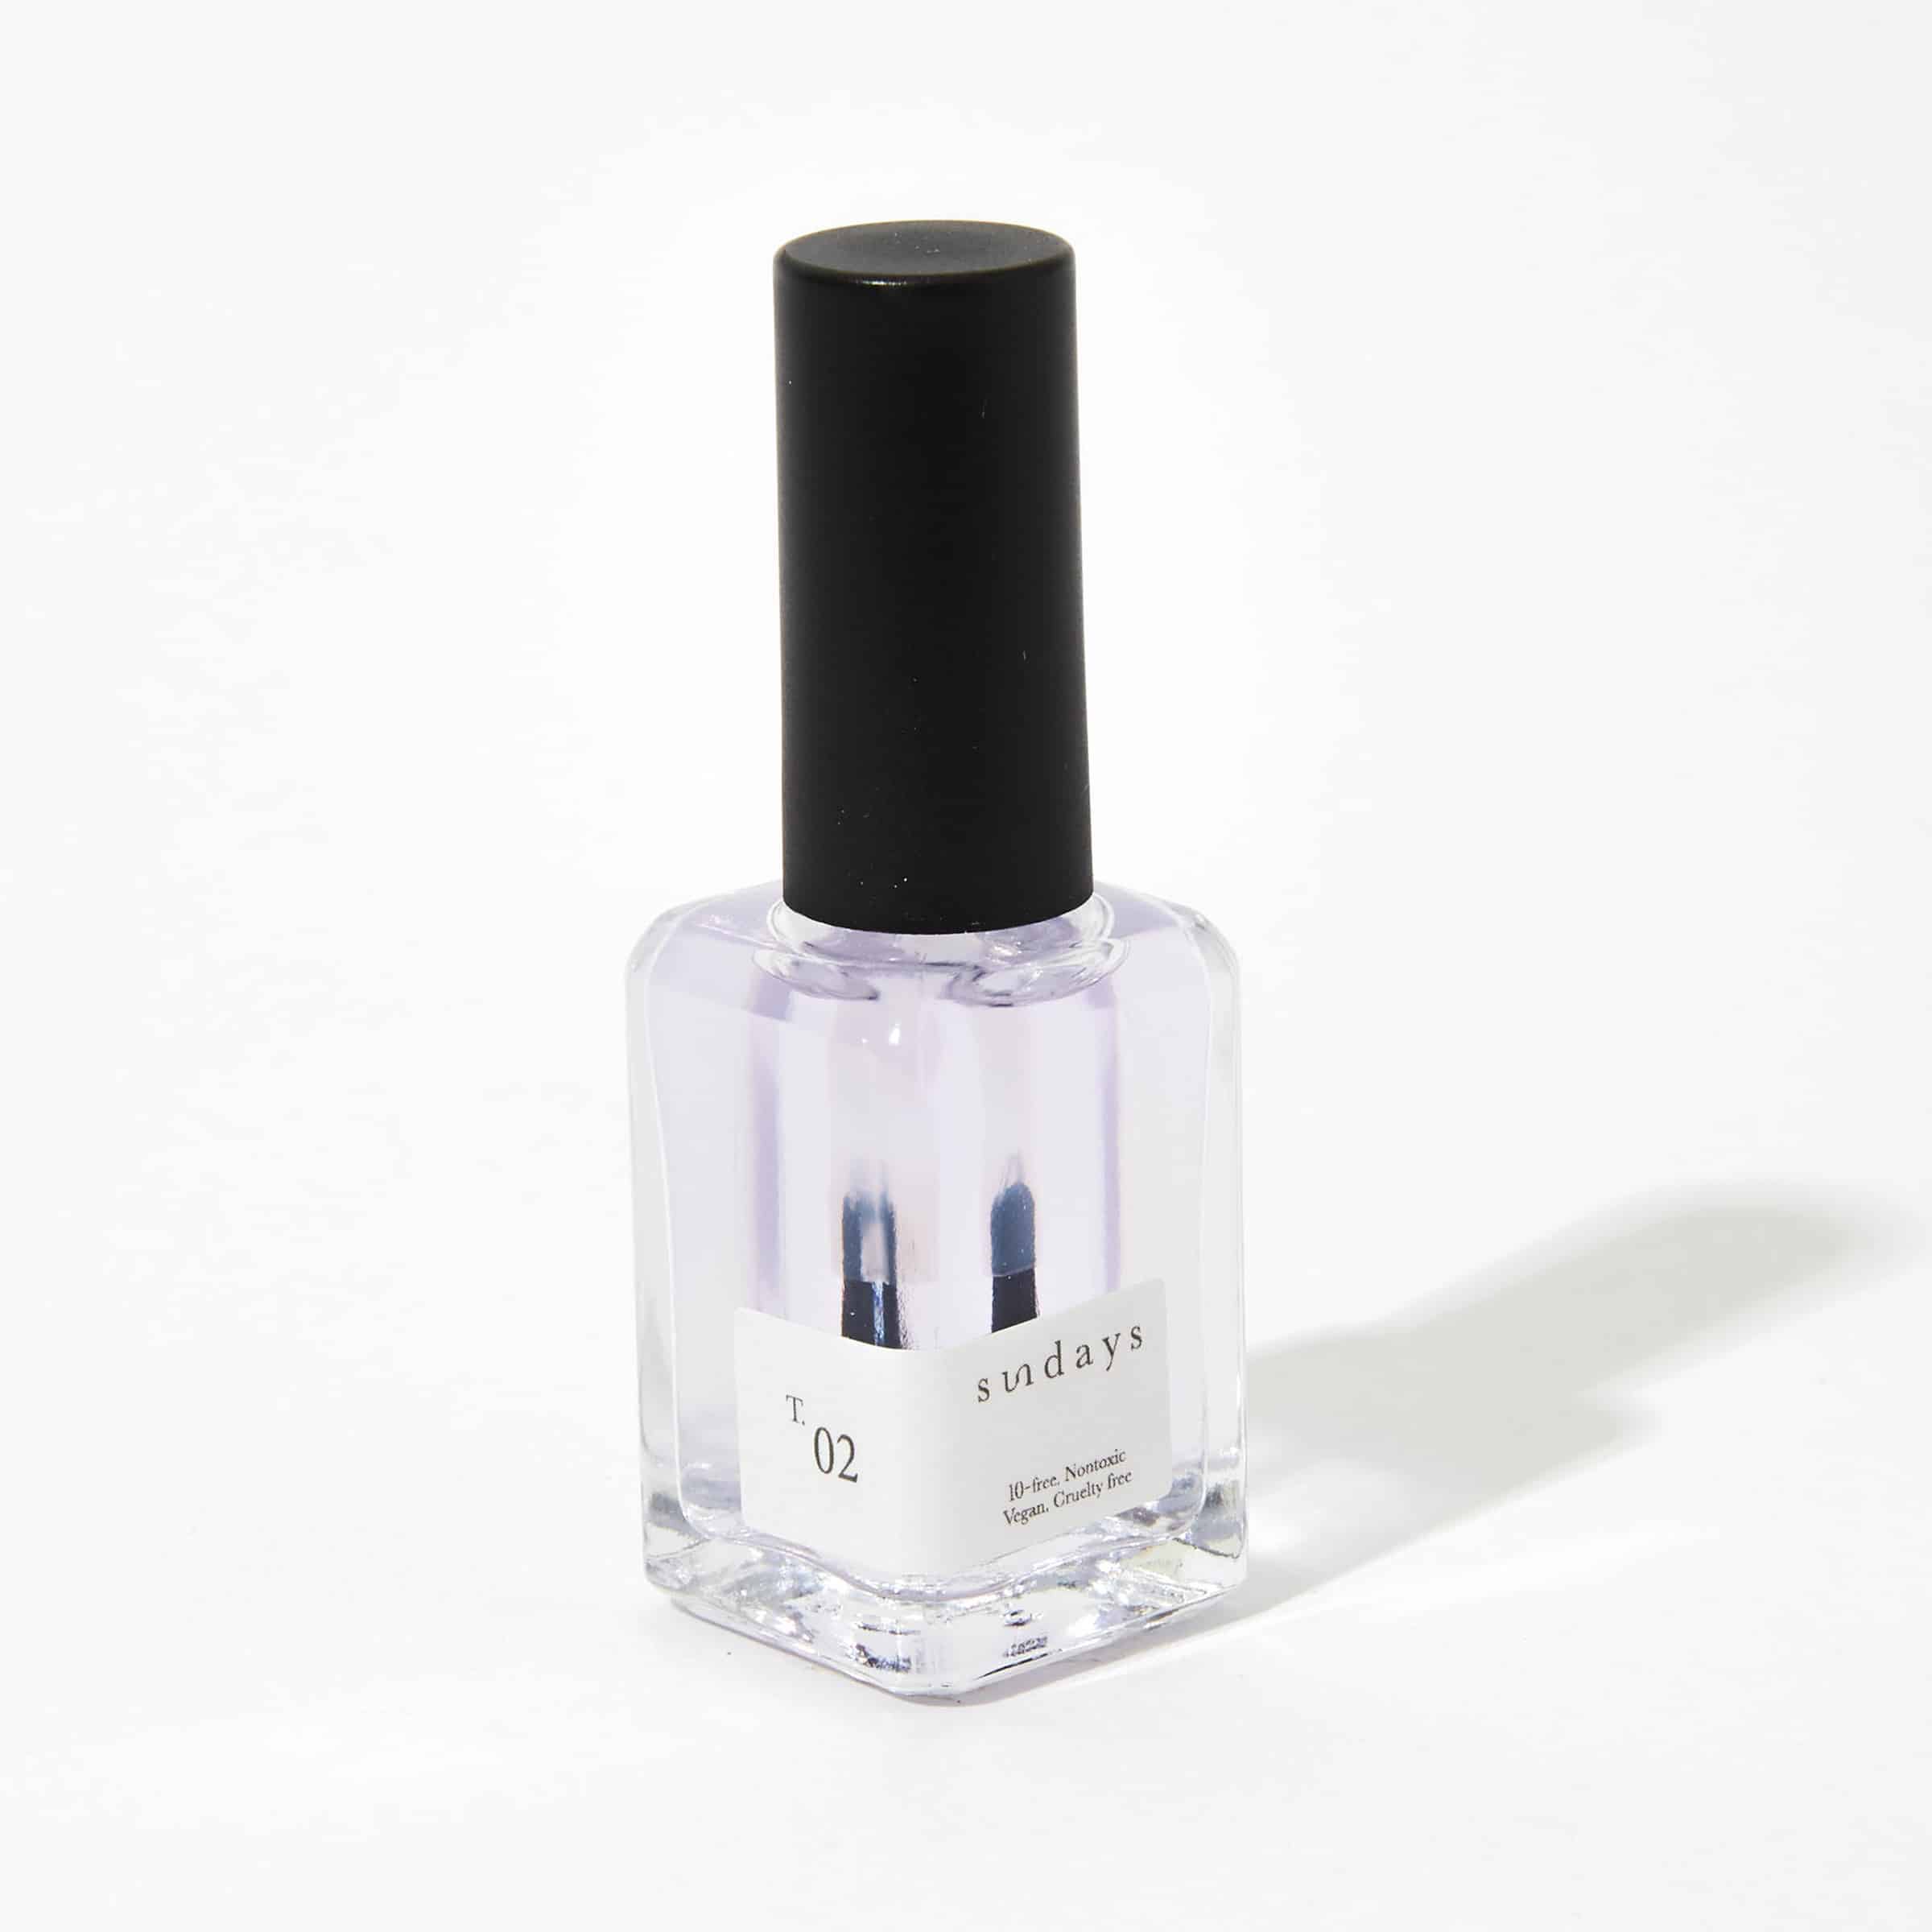  EXCUSE ME Quick Dry Fast Drying Super Shiny Nail Polish Top  Coat 0.5 oz 15ml : Beauty & Personal Care